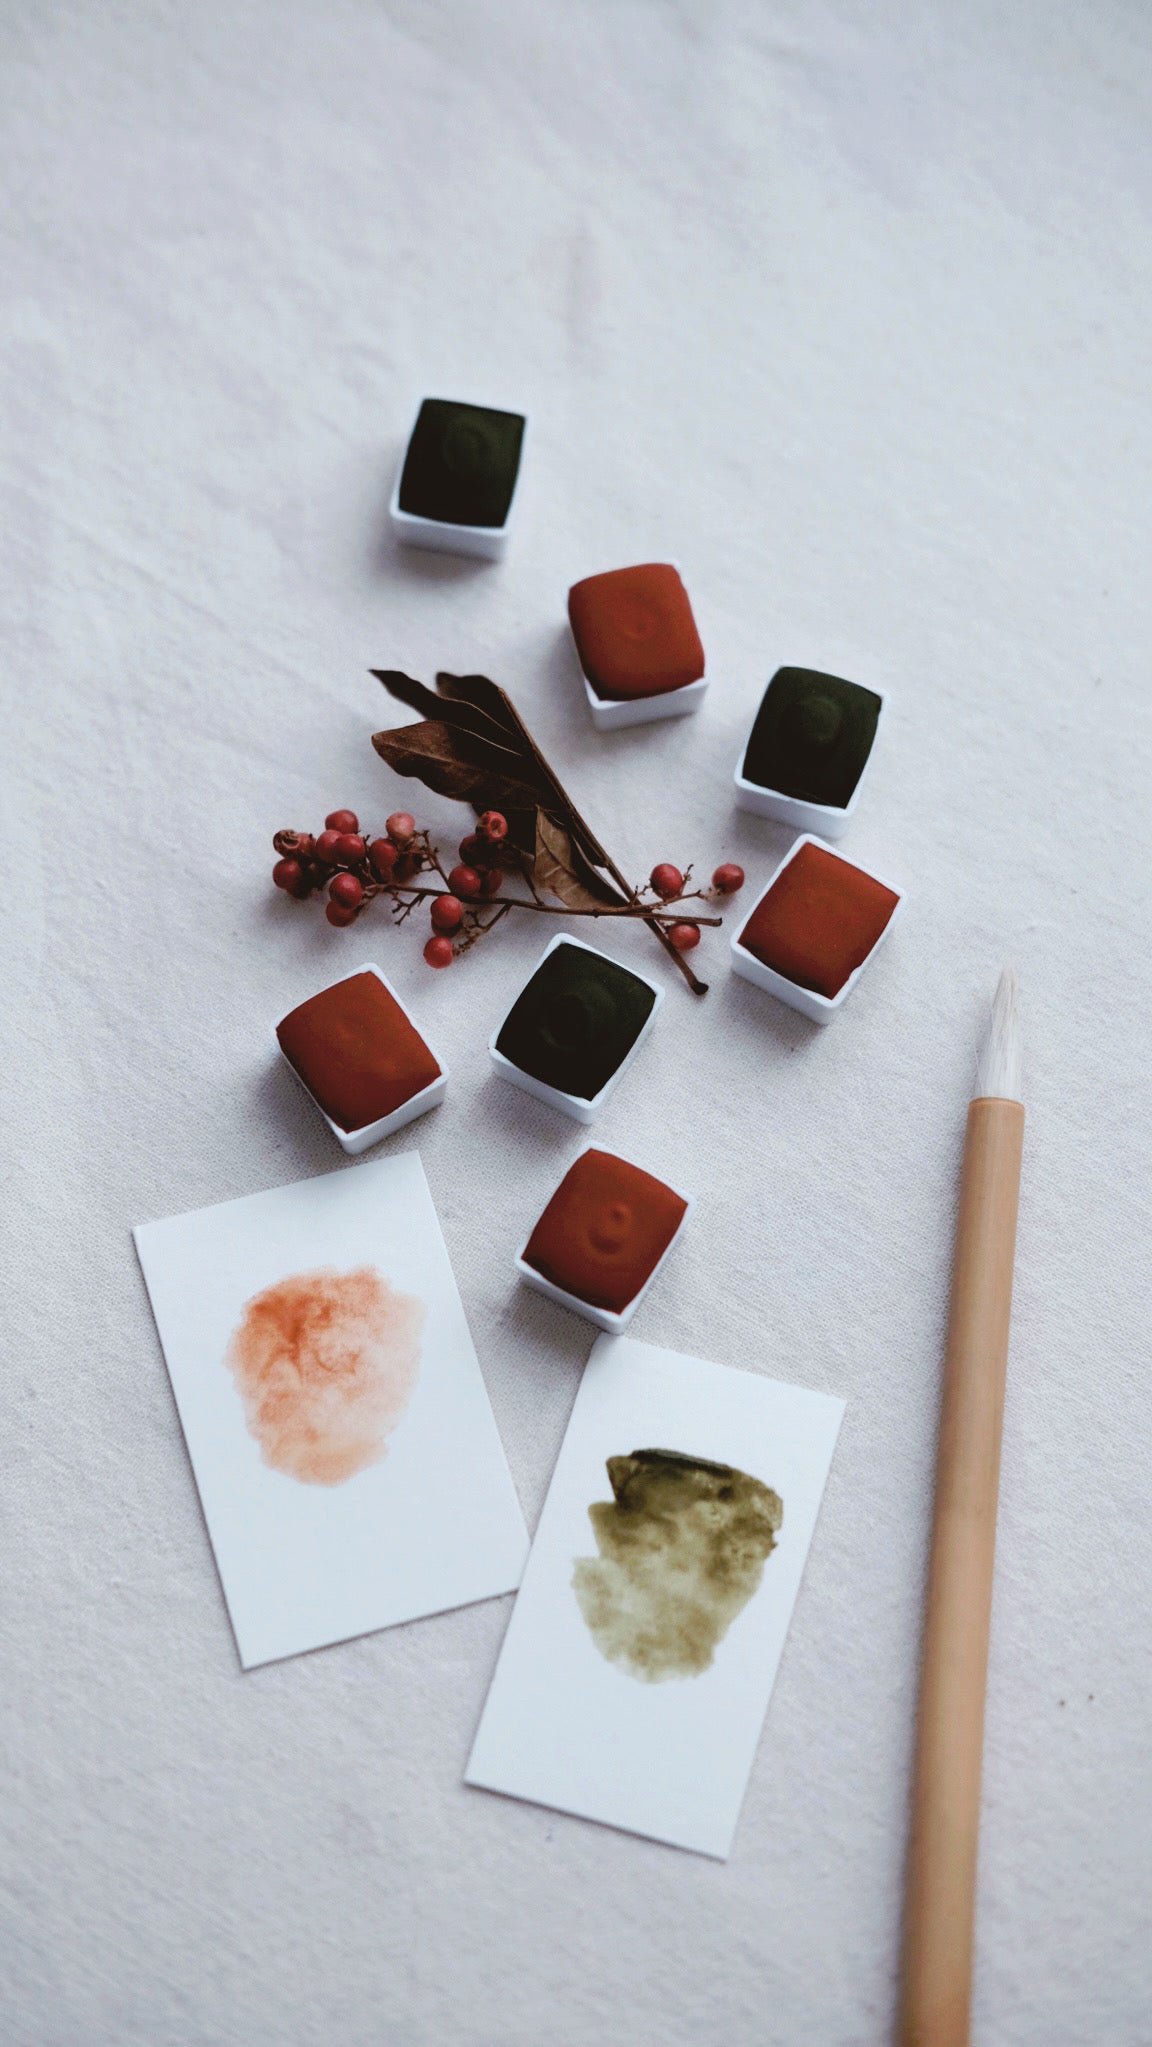 Evergreen  + Limited edition gemstone watercolor